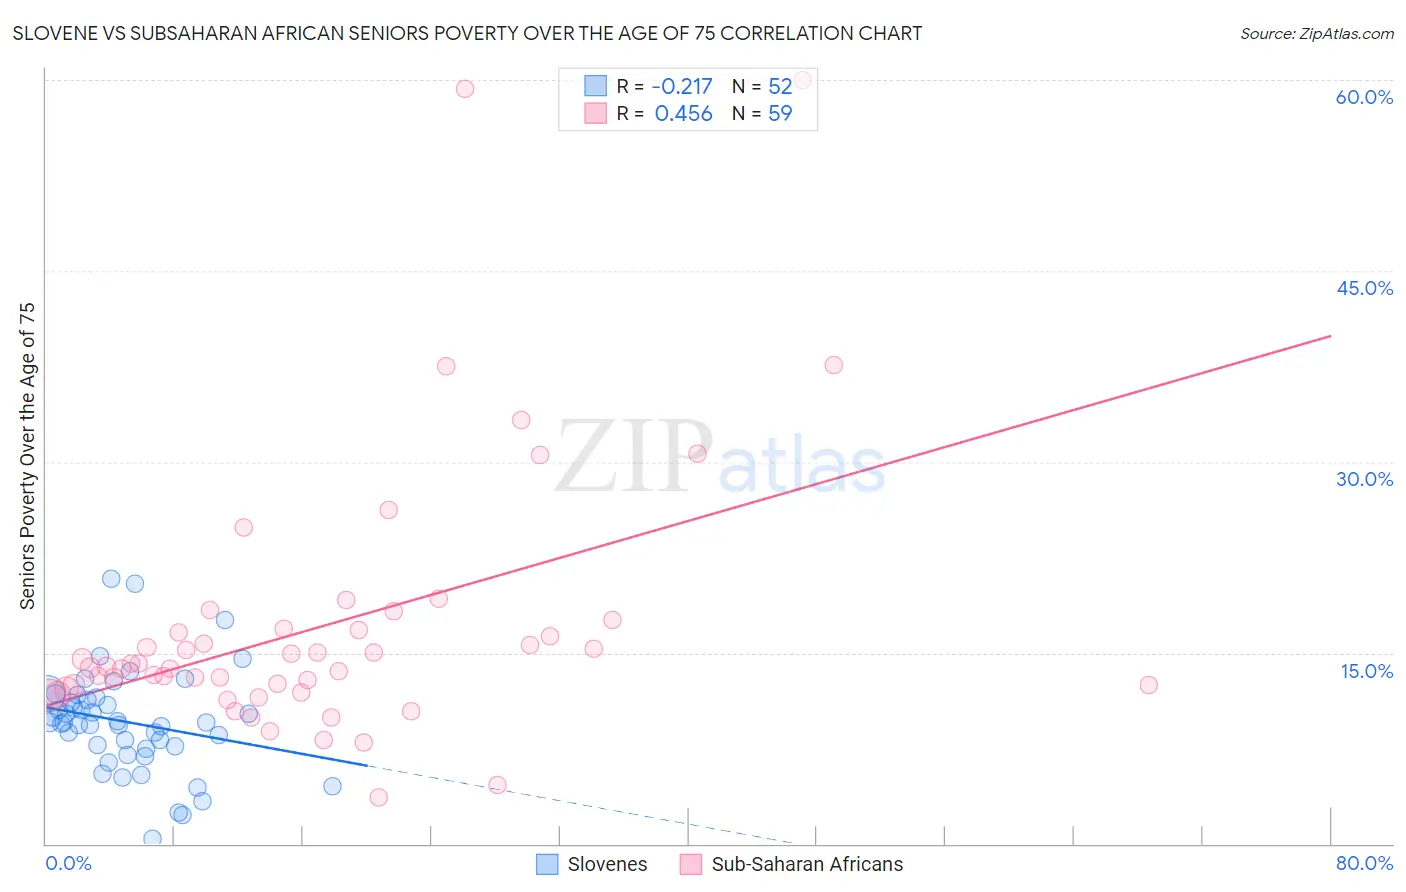 Slovene vs Subsaharan African Seniors Poverty Over the Age of 75